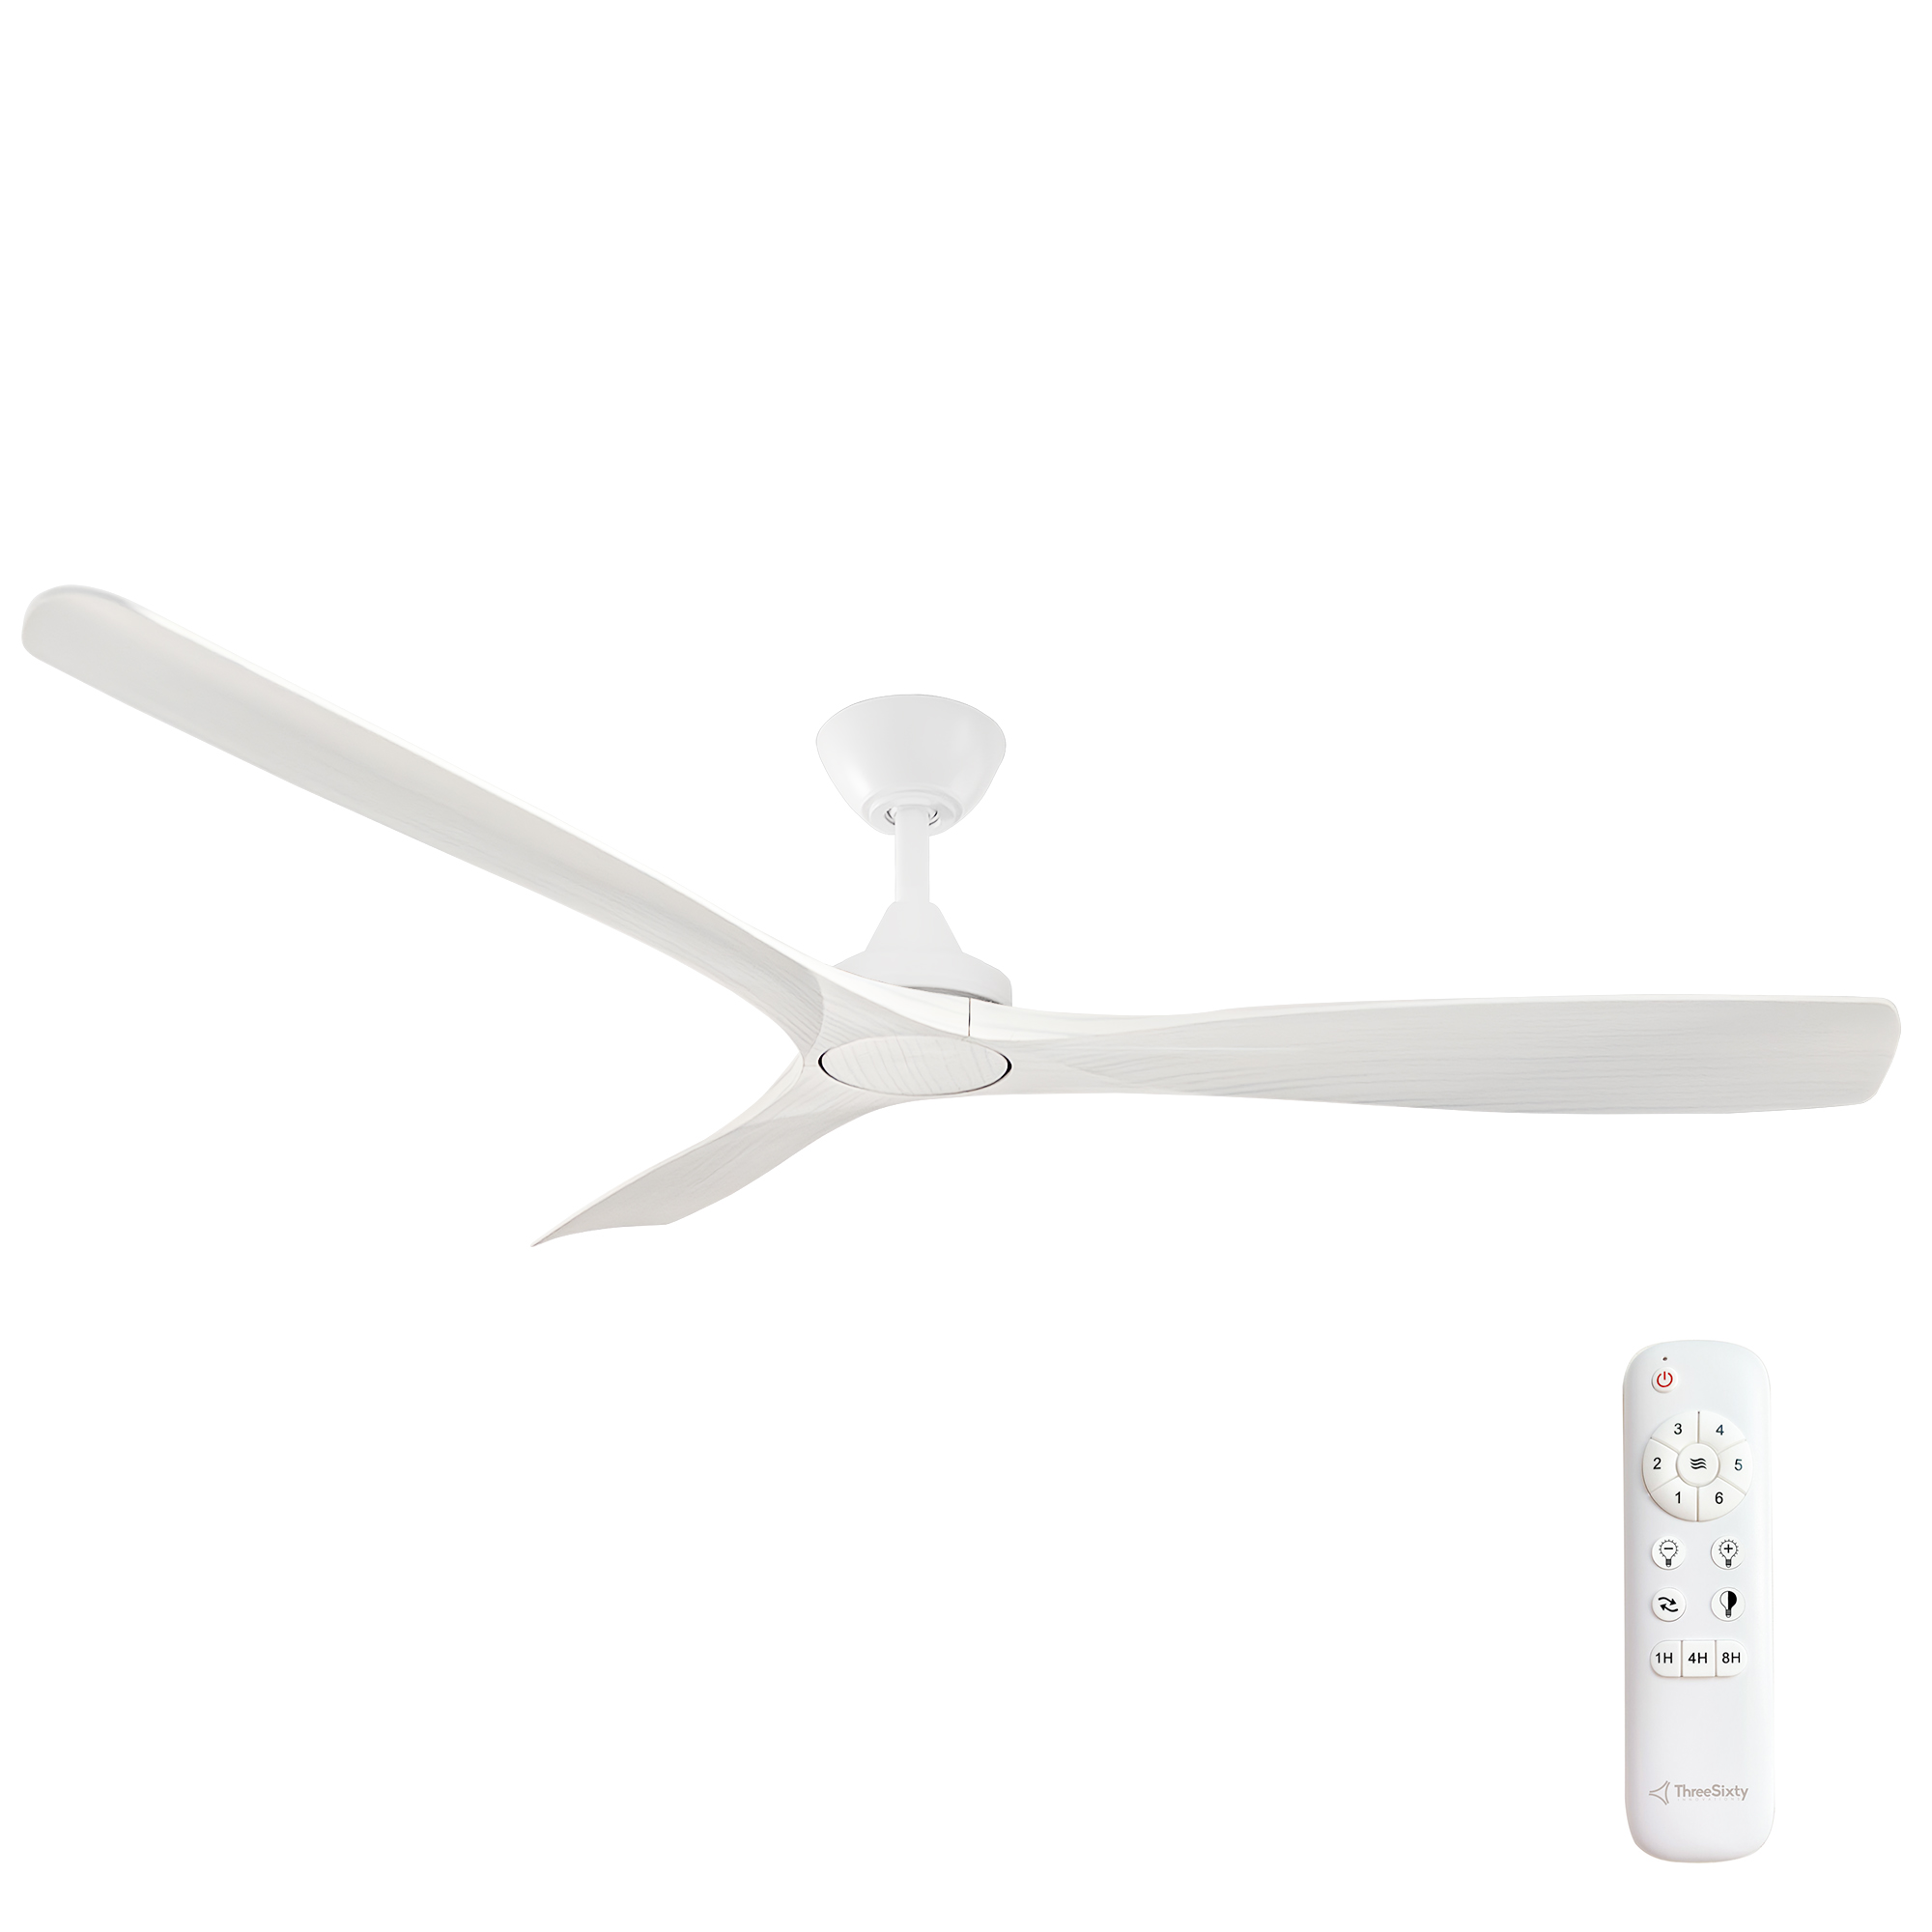 60" Spitfire DC Ceiling Fan in Matte White with White Wash blades